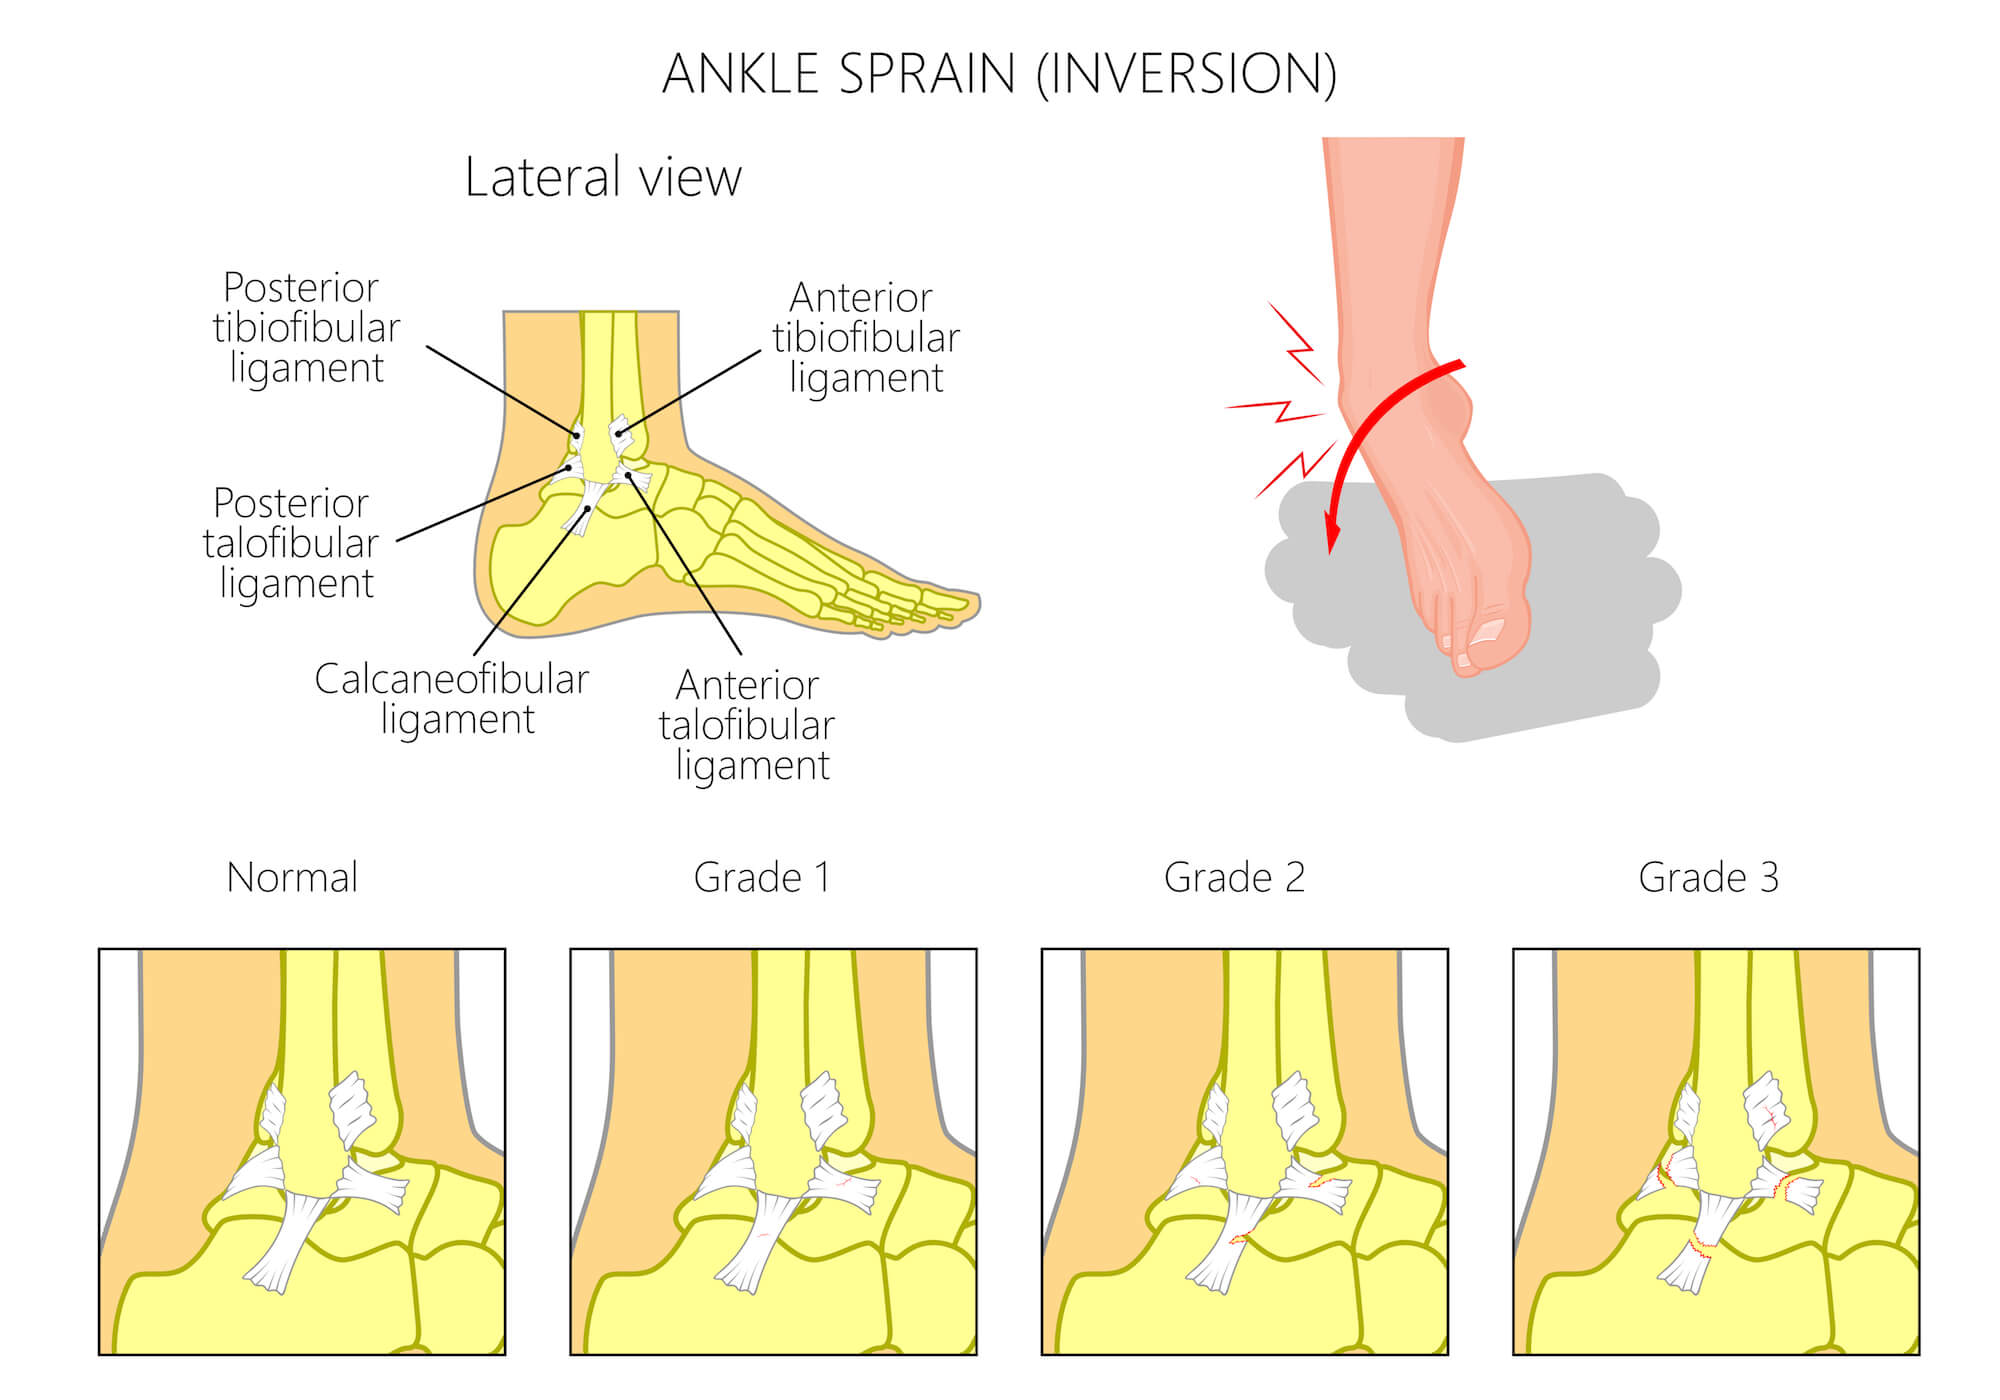 Illustration of varying grades of ankle sprains